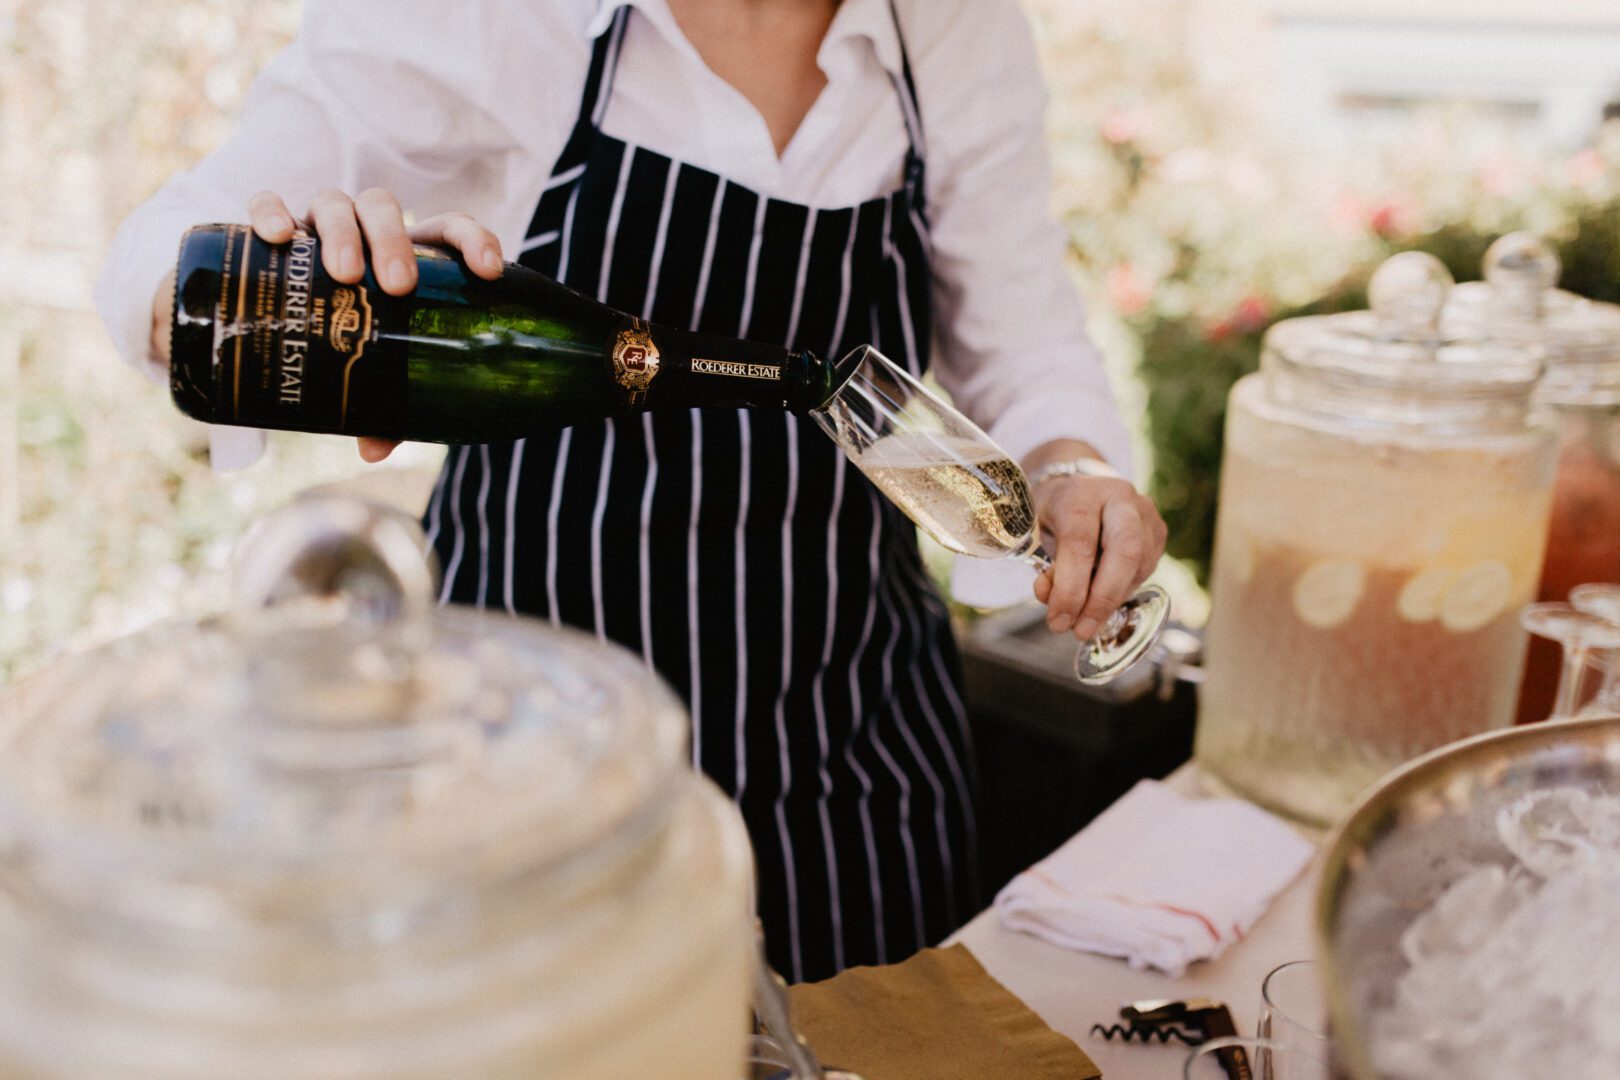 A woman pouring champagne into a glass.